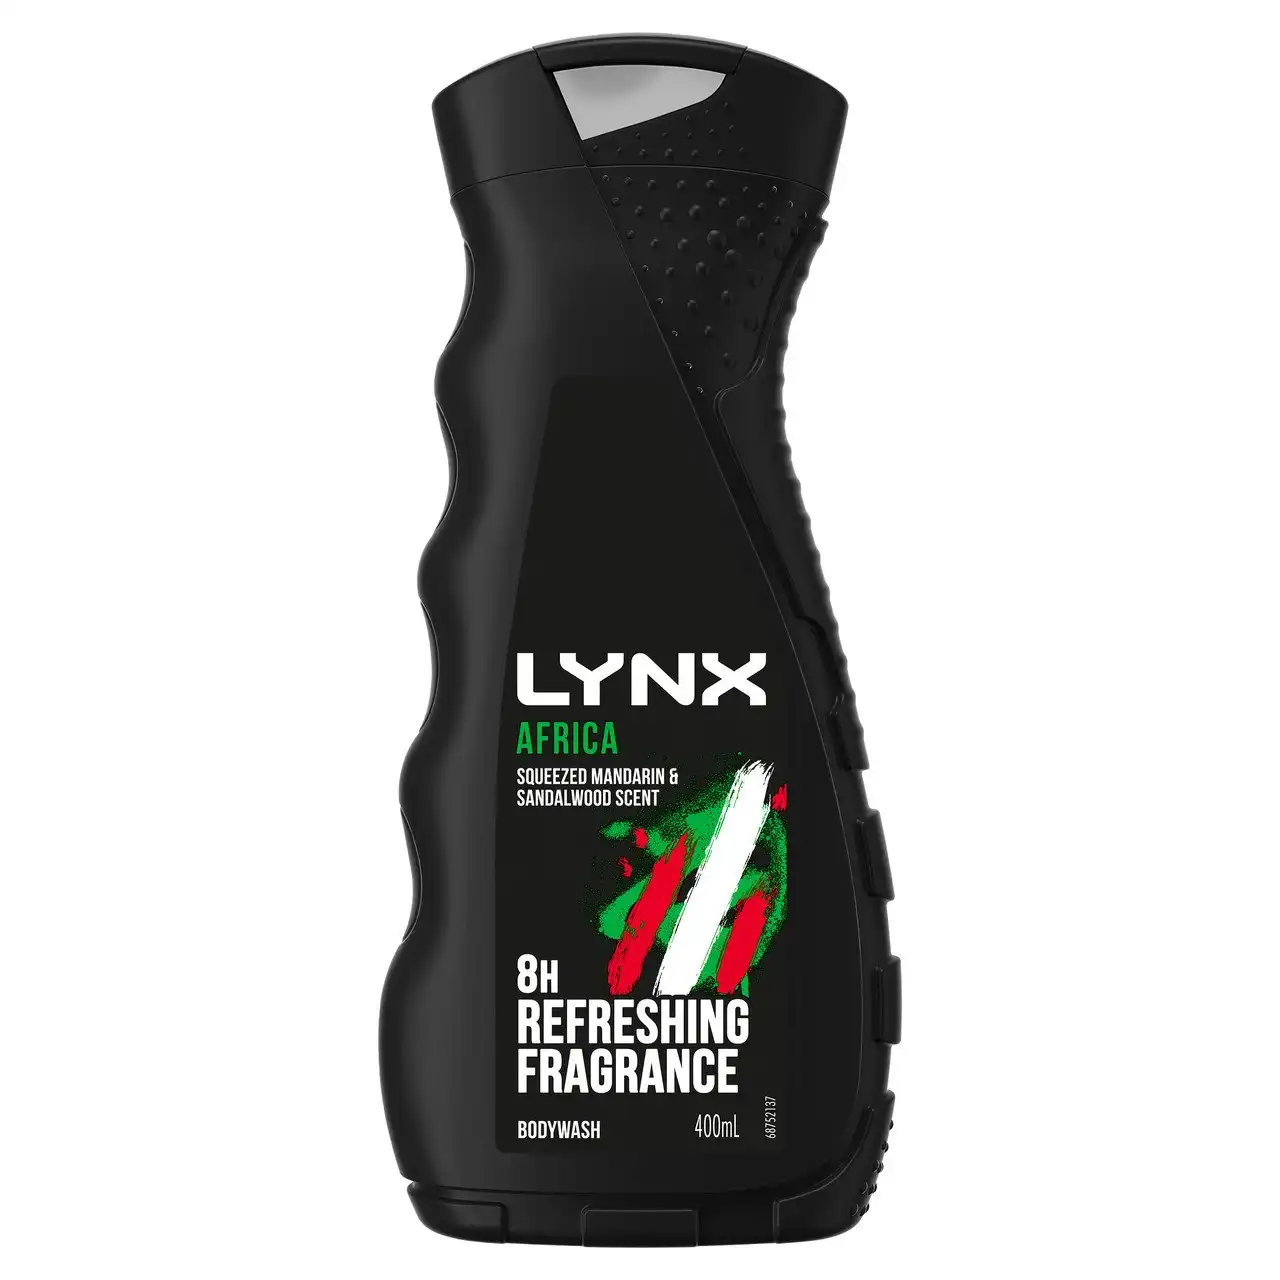 Lynx Body Wash 8-hour refreshing scent Africa shower gel with squeezed mandarin and sandalwood notes 400 ml